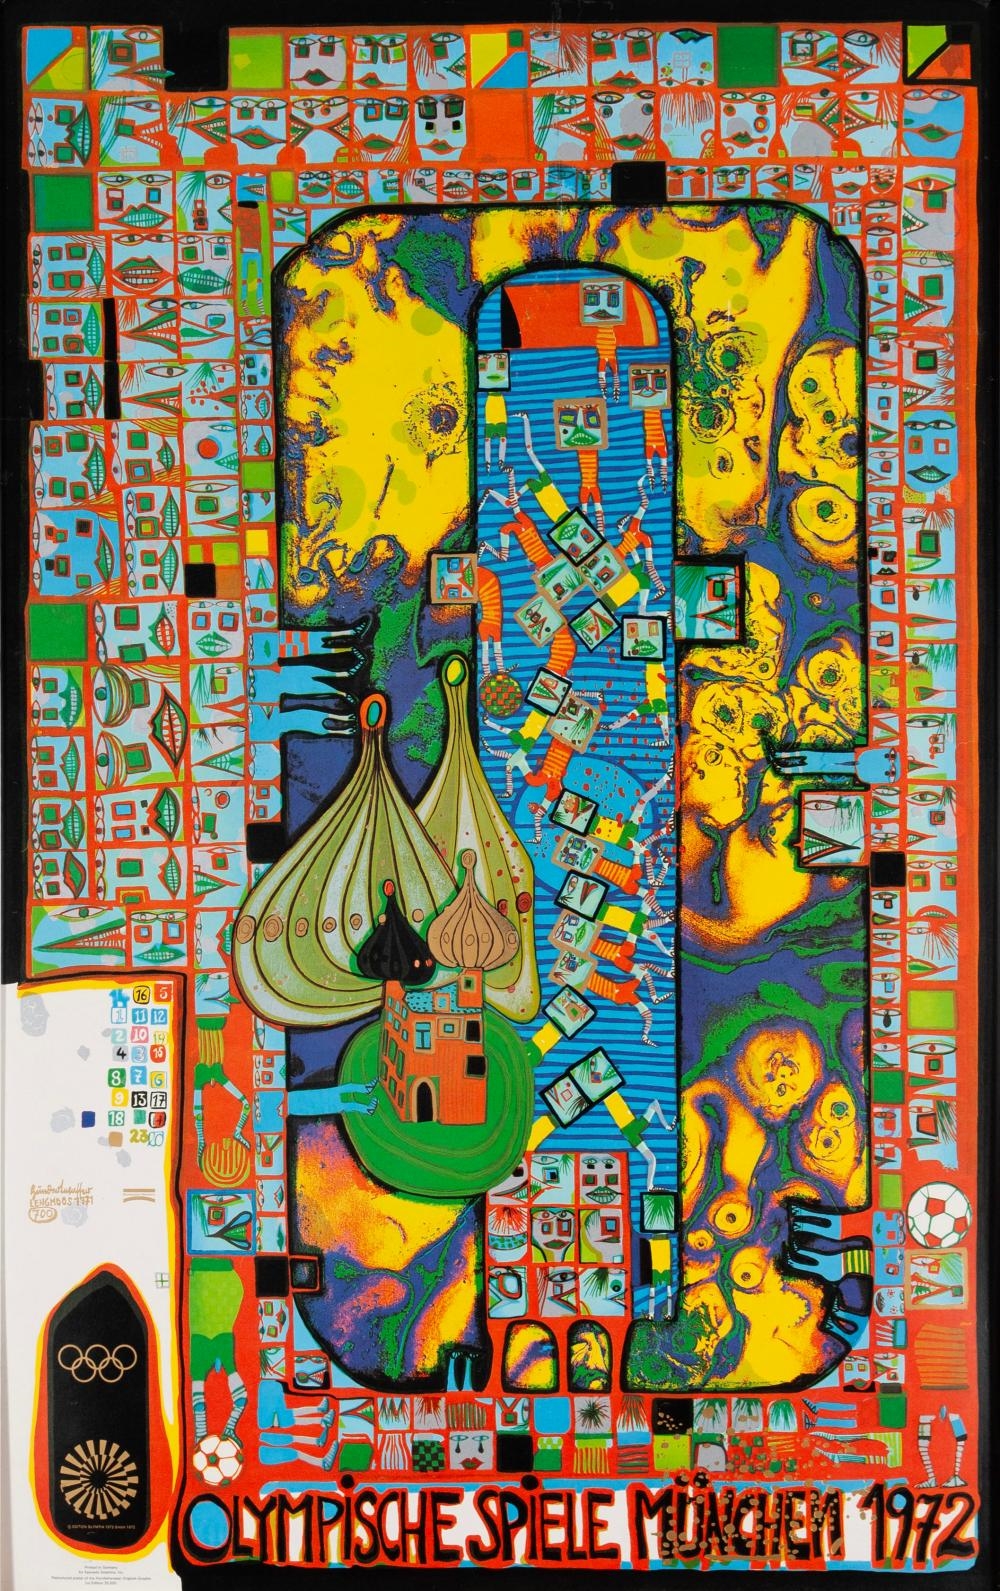 POSTER FOR THE 1972 OLYMPICS BY FRIEDENSREICH HUNDERTWASSER - Friedensreich Hundertwasser